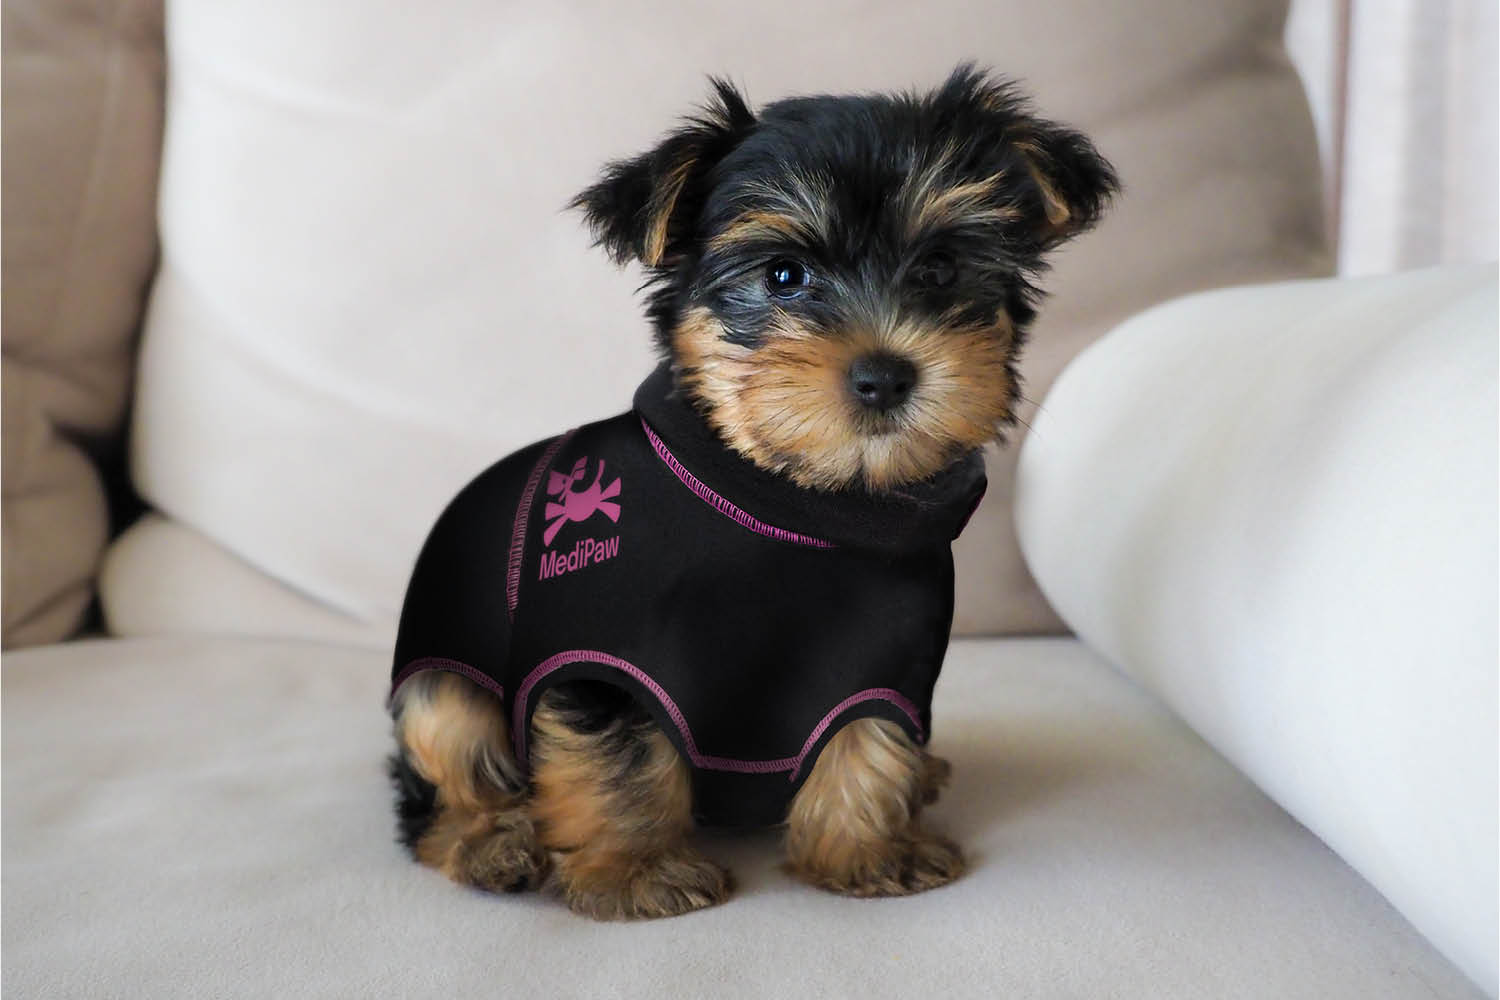 A small yorkie wearing a MediPaw: Protective/Surgical Dog Suit by Your Whole Dog.